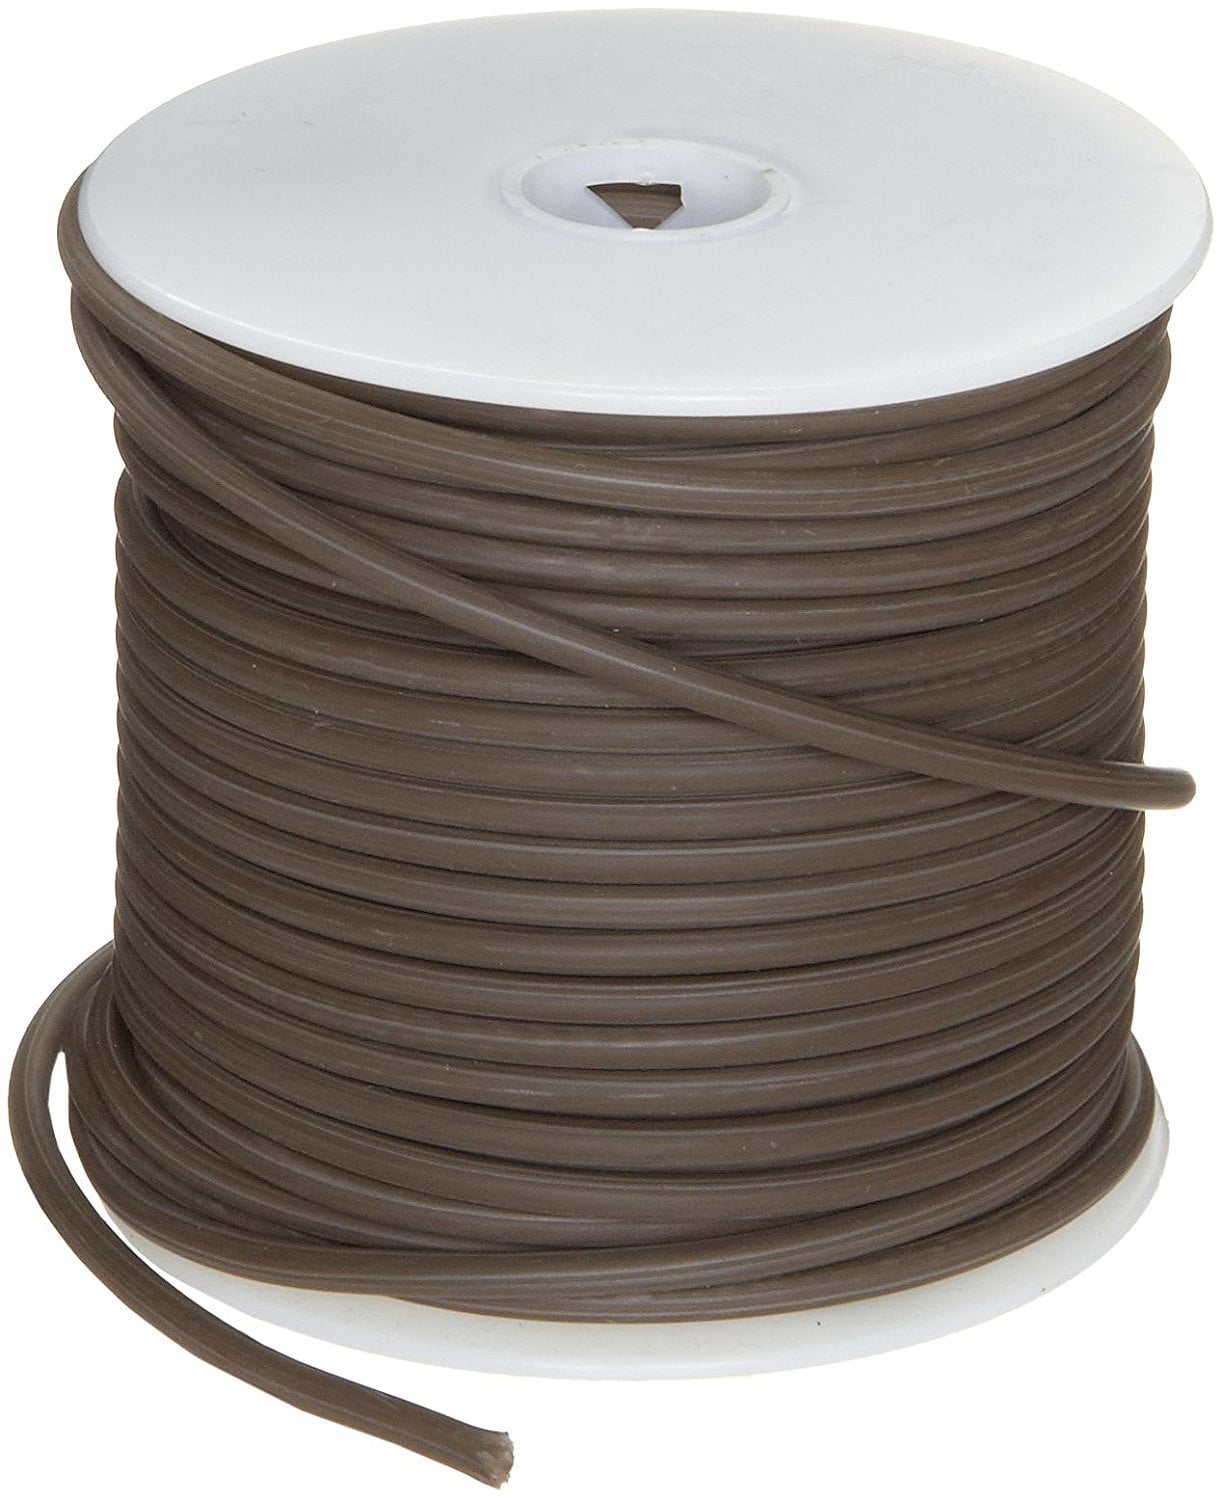 18 AWG 0.040" Diameter GXL Automotive Copper Wire 1000' Length Pack of Brown 